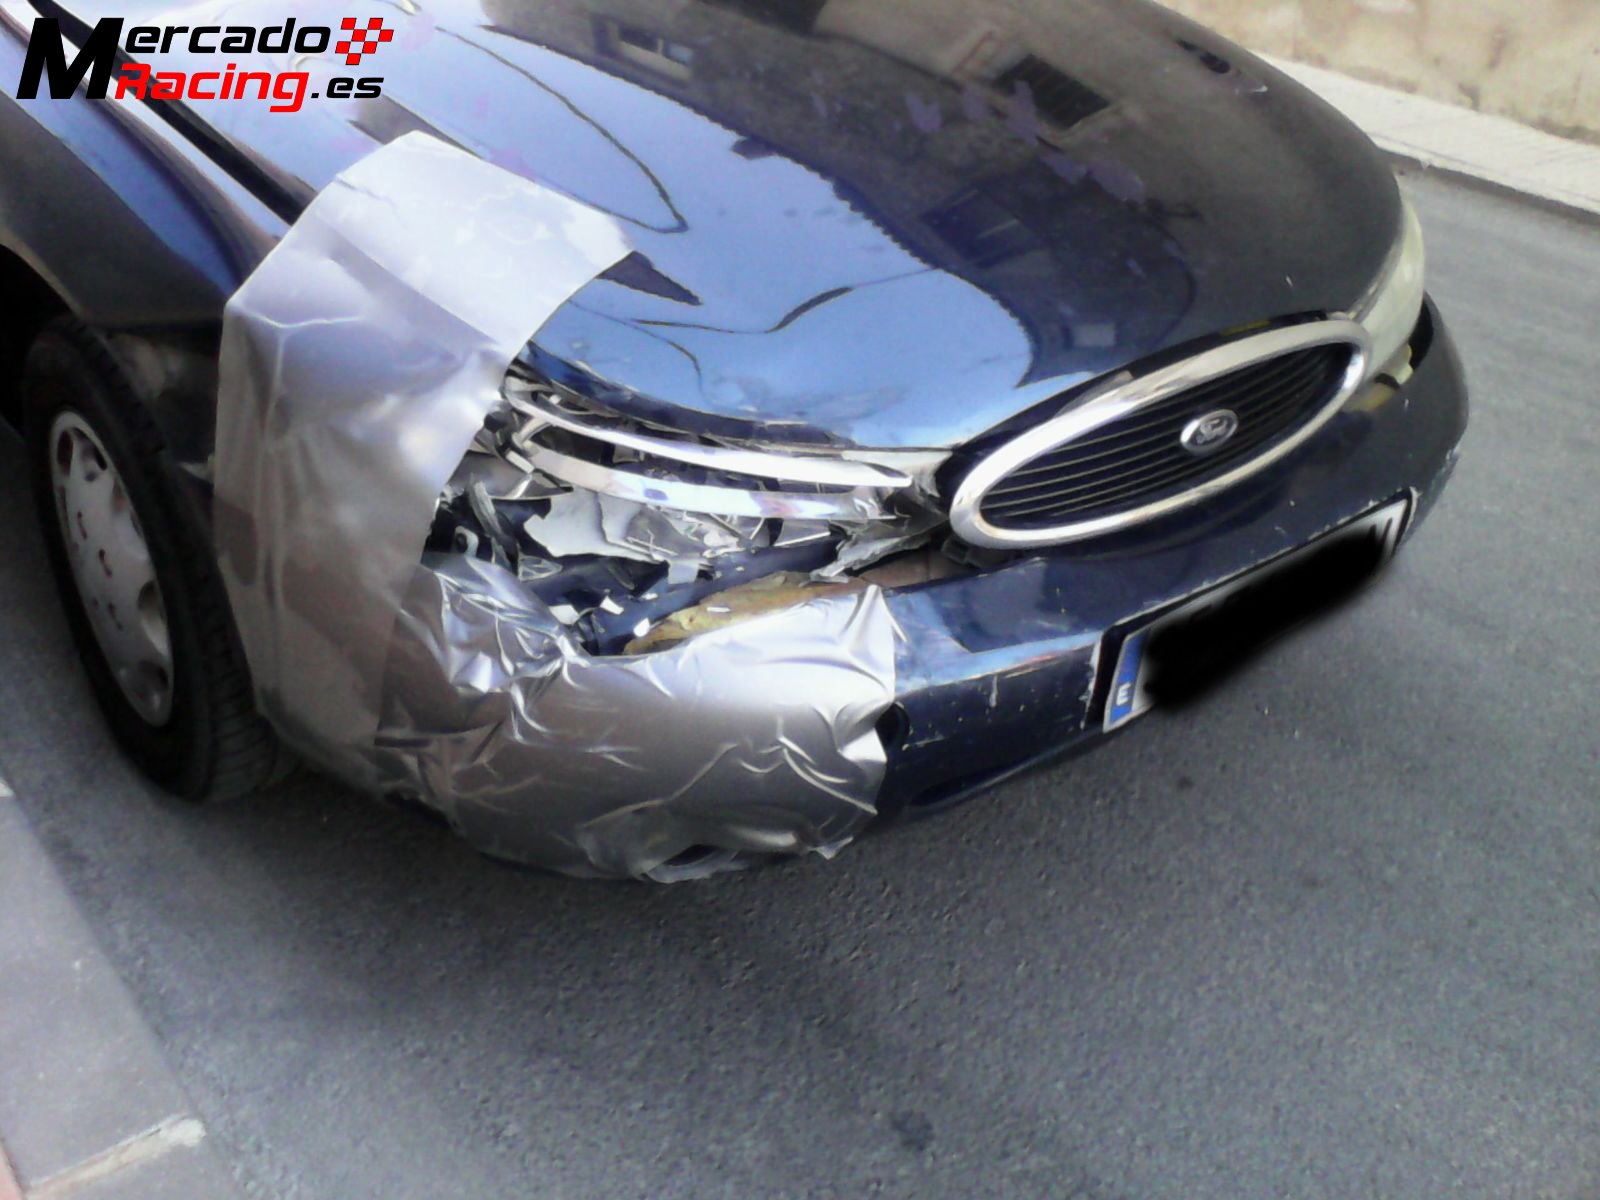 Ford mondeo golpe frontal mecanica perfecto